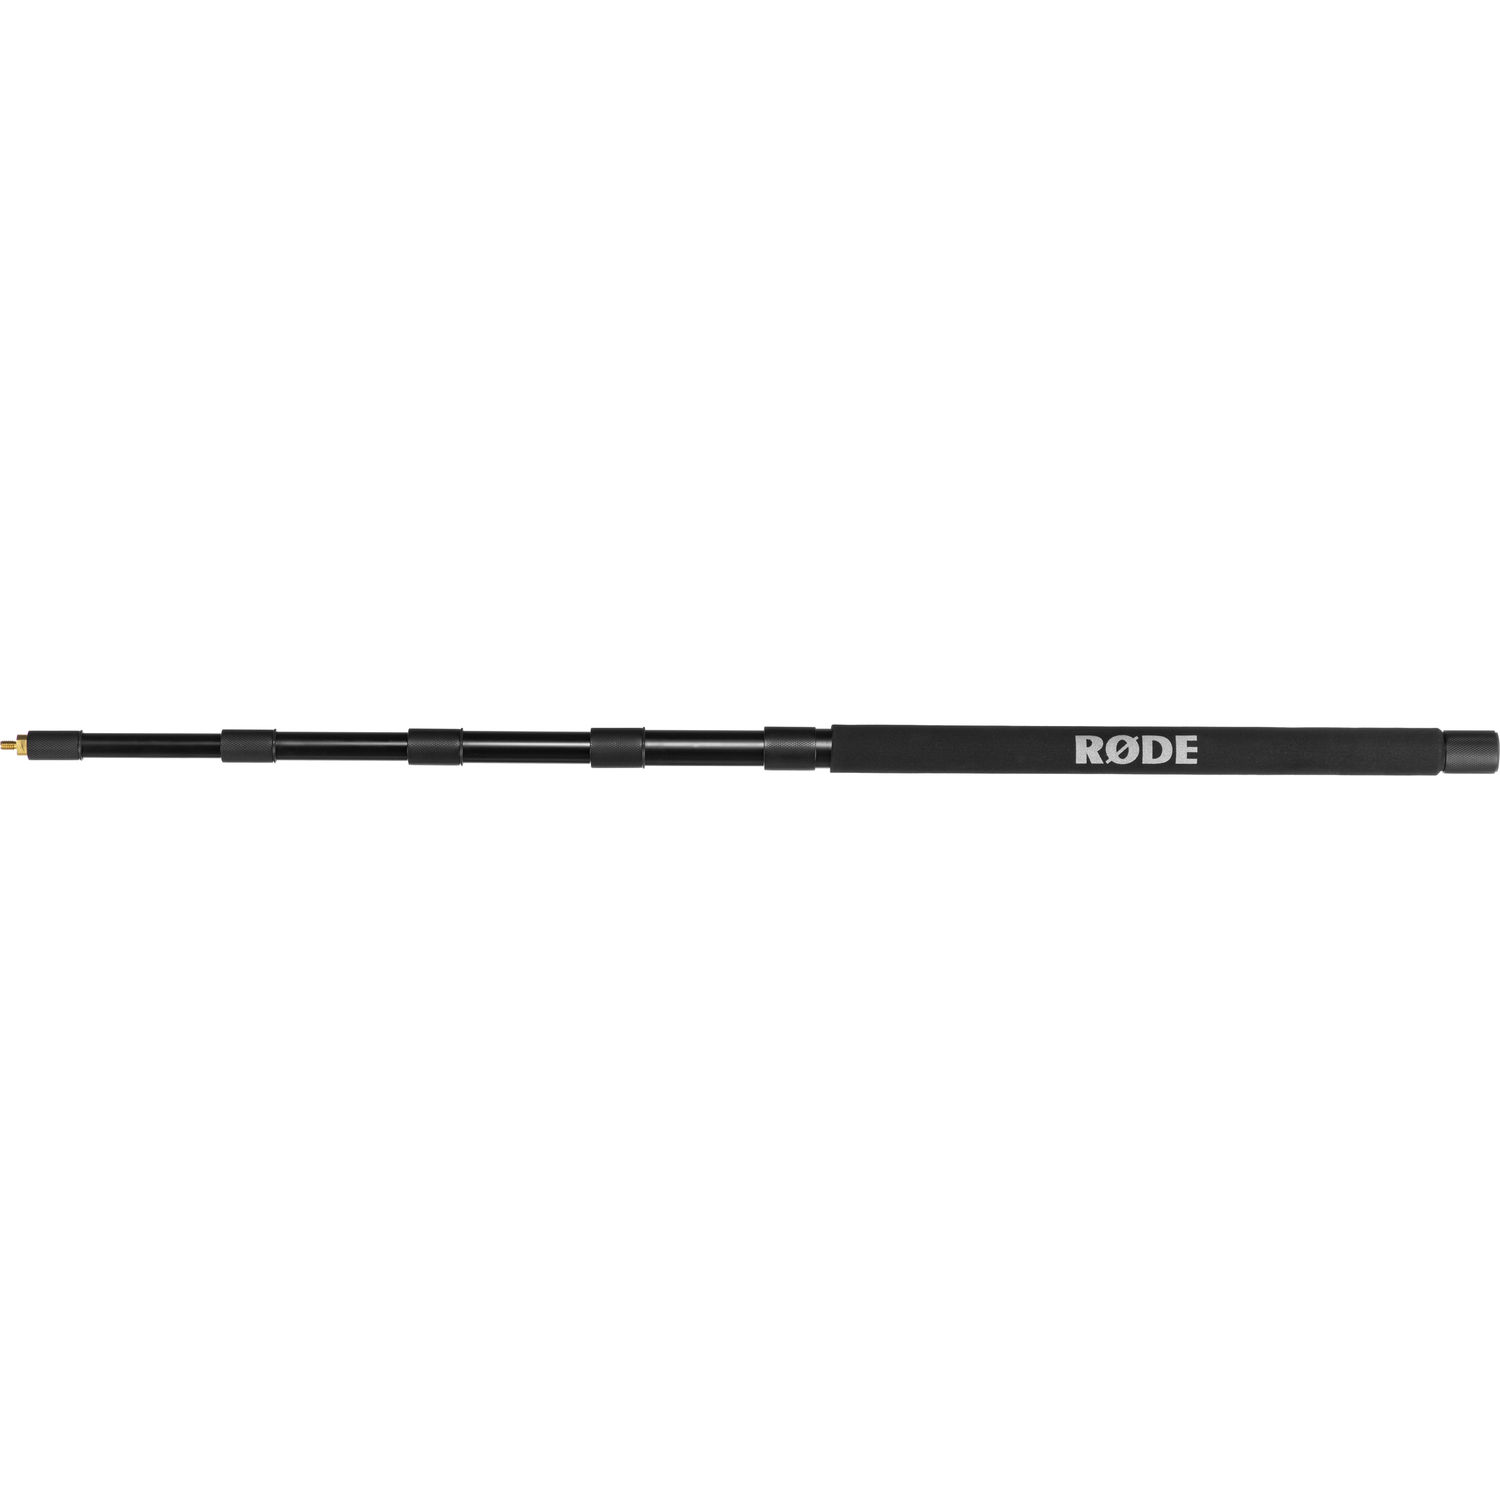 Rode Aluminum Boom Pole 33-129"  for Rode NTG-1, NTG-2 and Video Mic